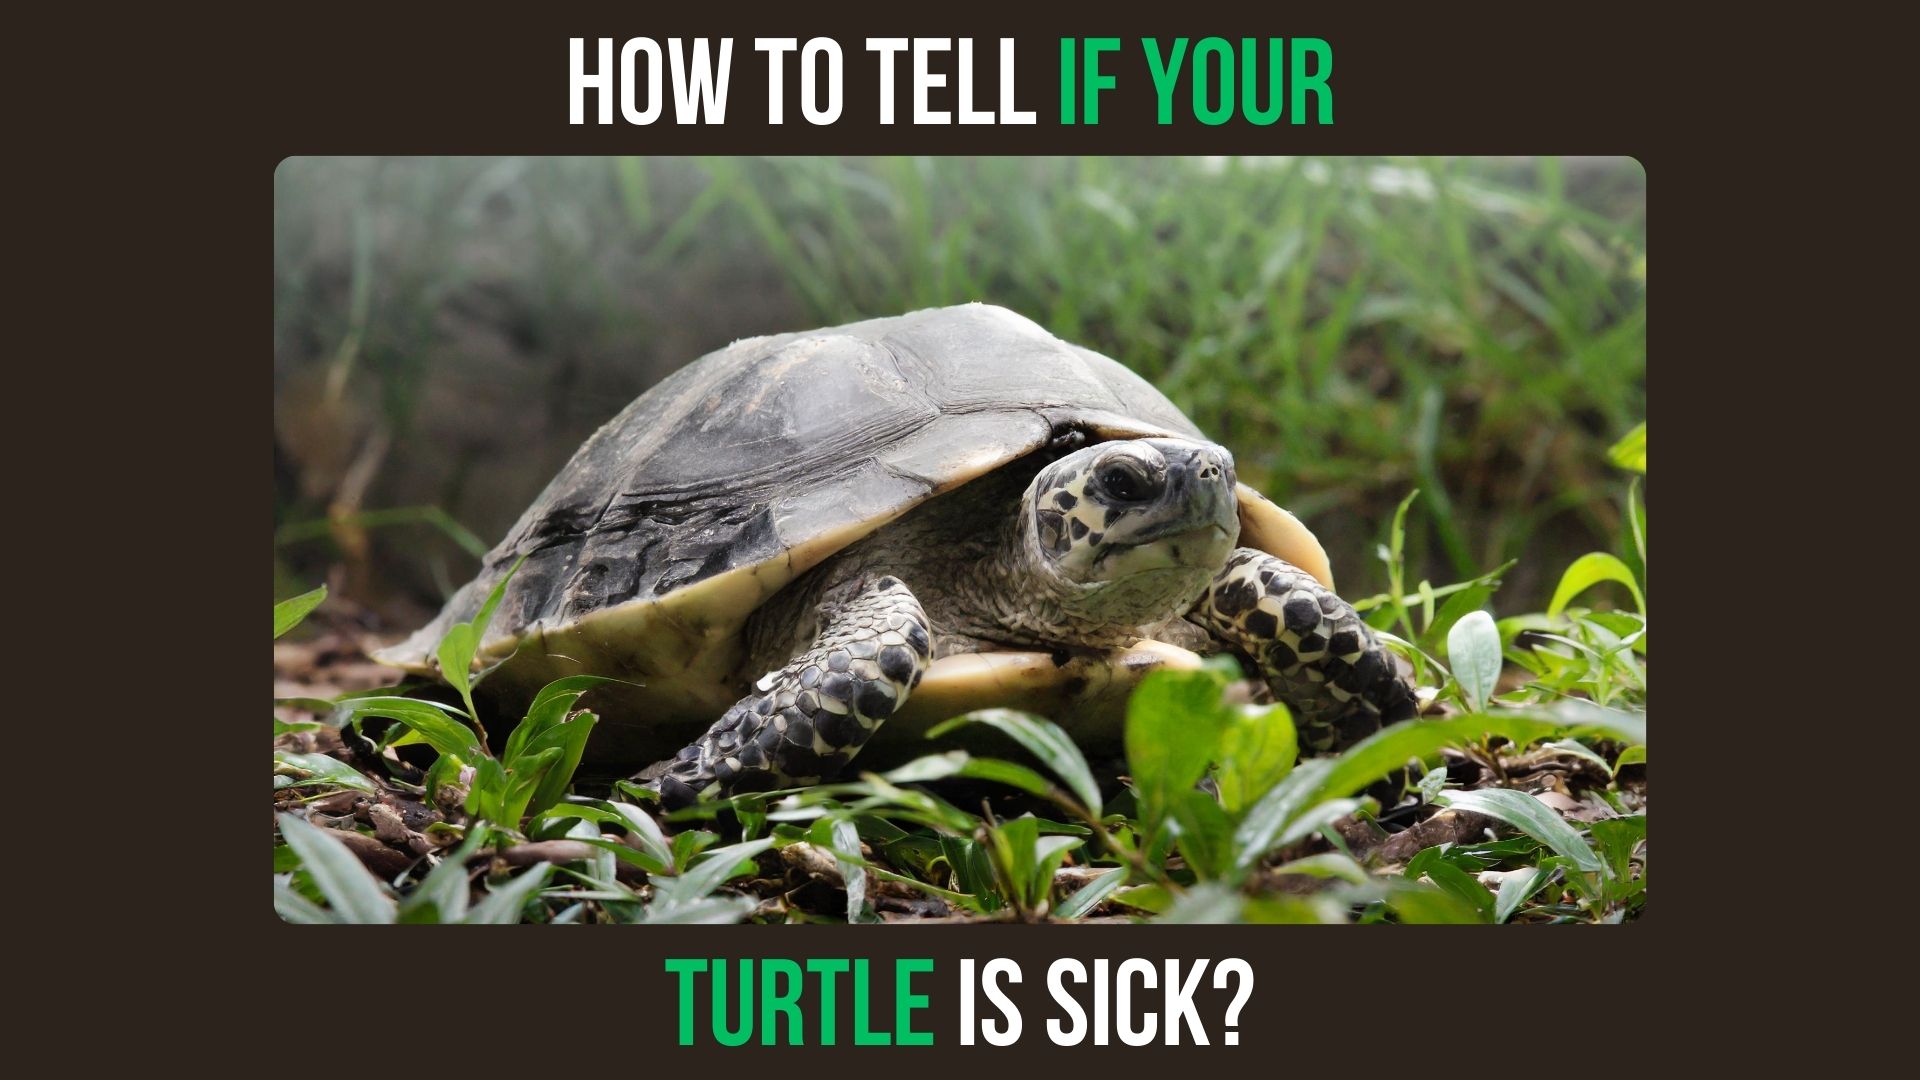 How to Tell If Your Turtle is Sick